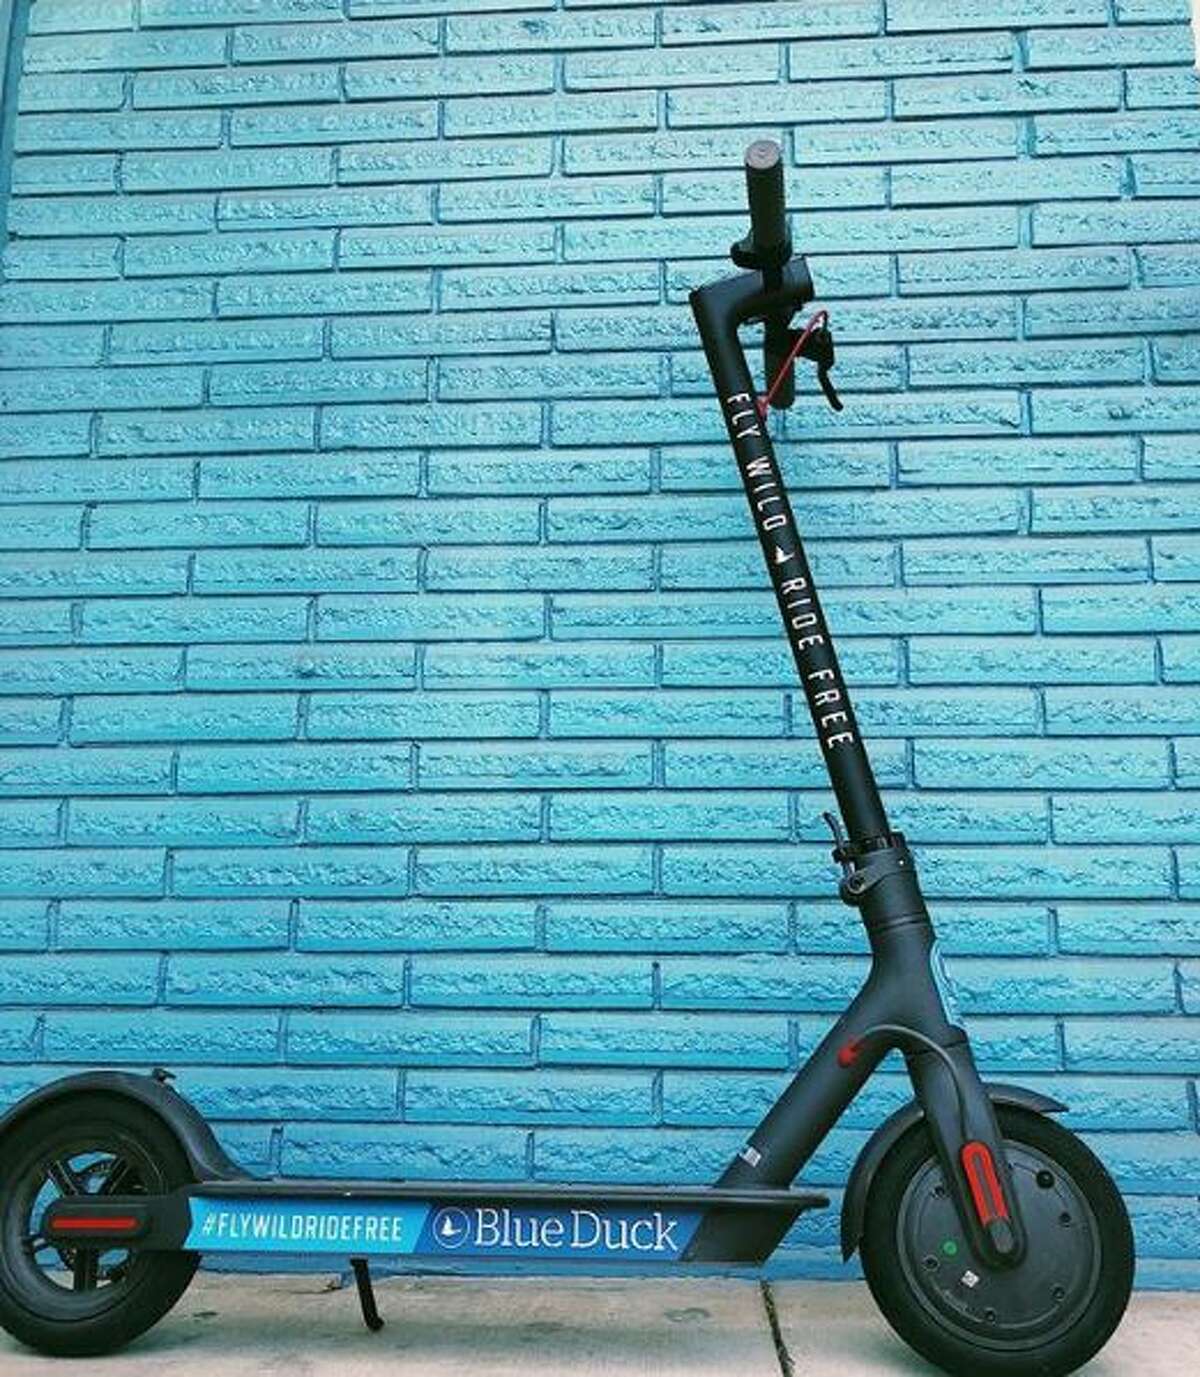 Blue Duck Scooters, an electric scooter company, plans to launch dozens of scooters in San Antonio at the beginning of July 2018. Eventually, the company plans to have about 1,000 of the scooters in San Antonio. The company targets college students and young professionals rather than tourists and visitors. (Courtesy of Blue Duck Scooters)